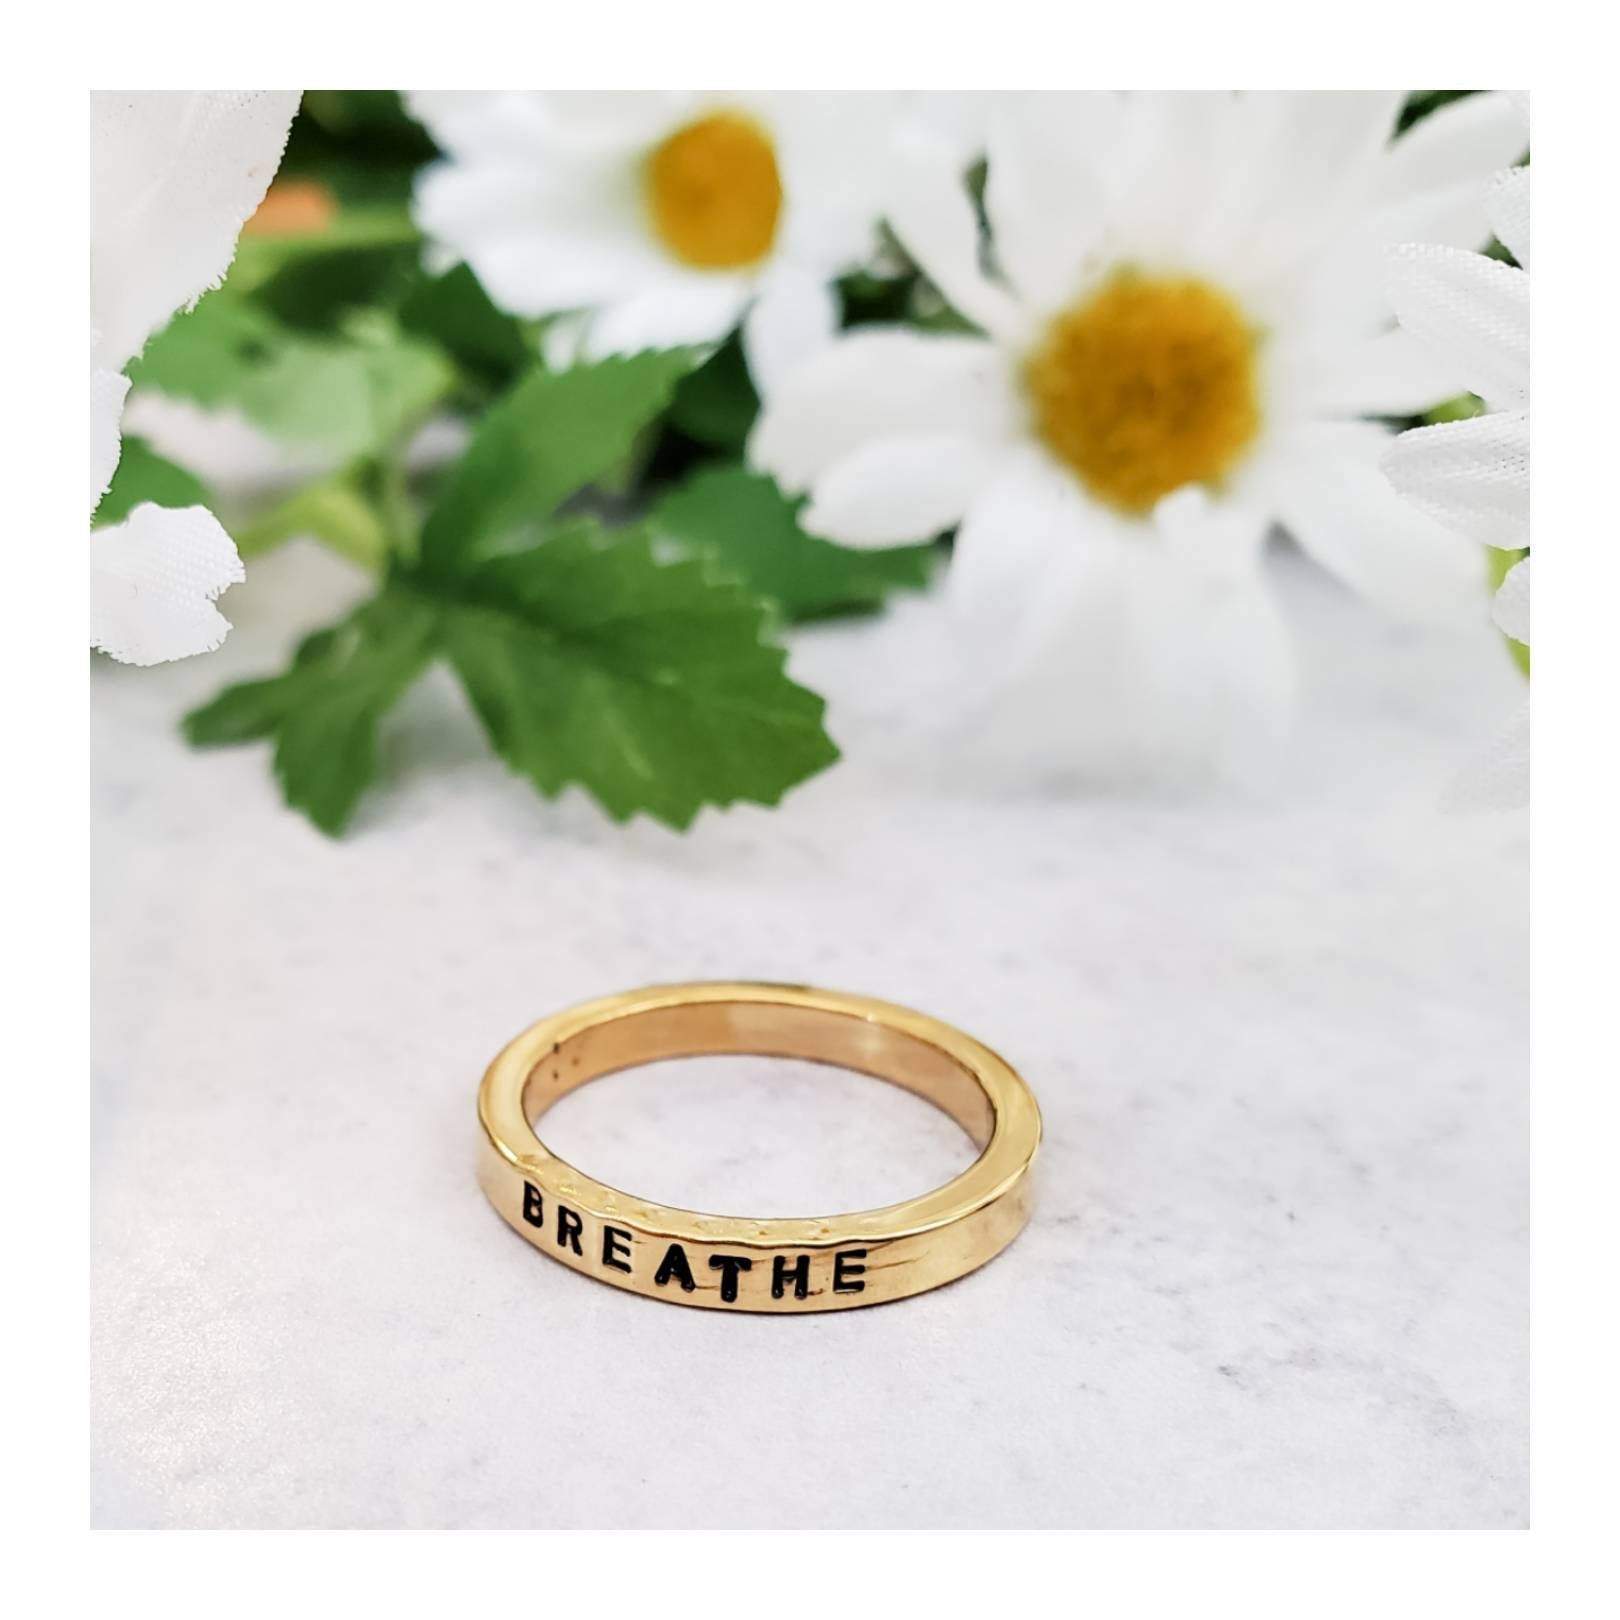 BREATHE Gold Plated Band Ring Salt and Sparkle